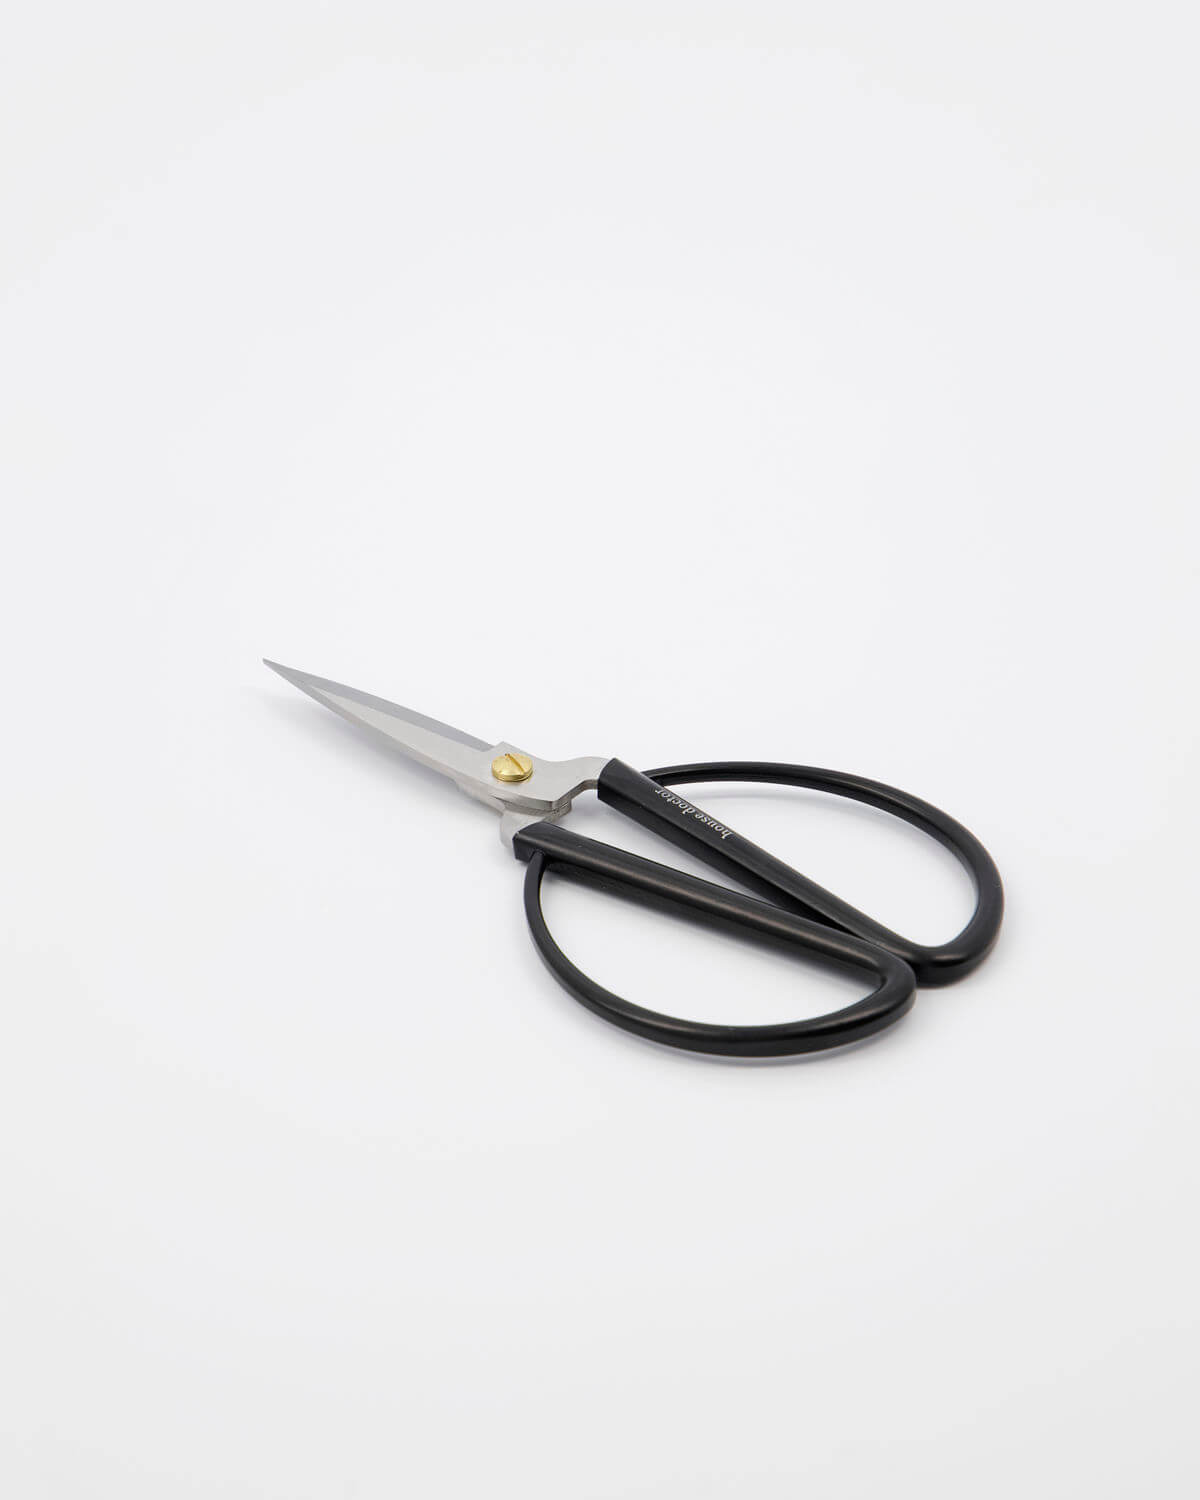 Shears Scissors | Stainless Steel | by House Doctor - Lifestory - House Doctor